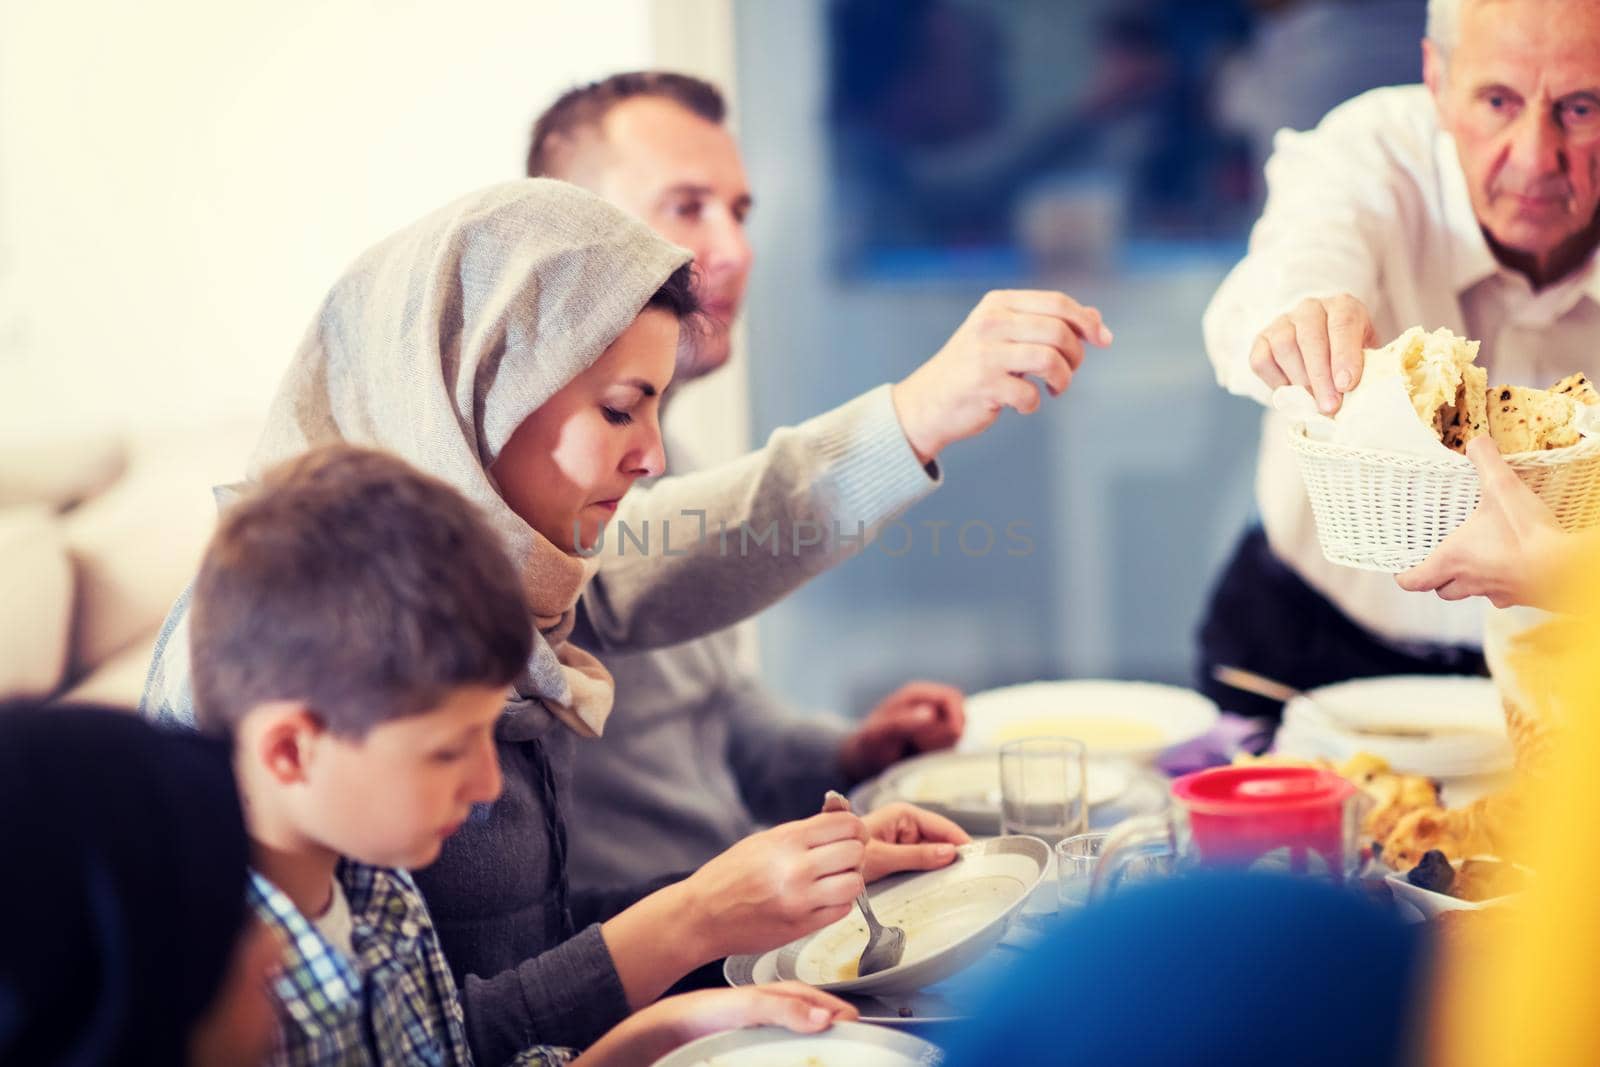 modern multiethnic muslim family enjoying eating iftar dinner together during a ramadan feast at home